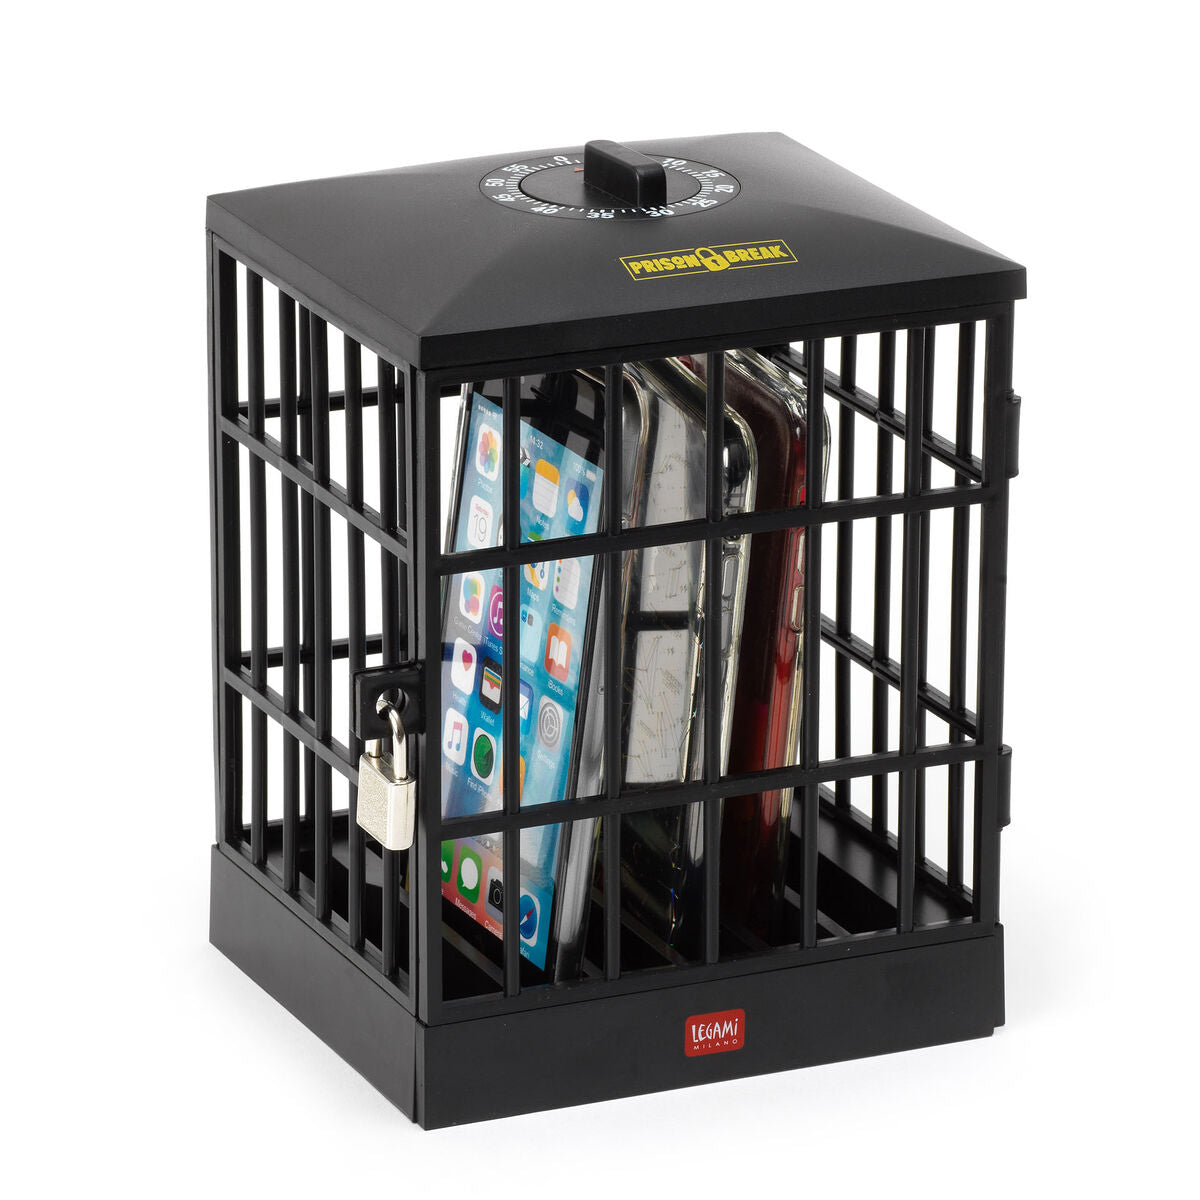 Fab Gifts | Legami Prison Break Cell Phone Jail by Weirs of Baggot Street